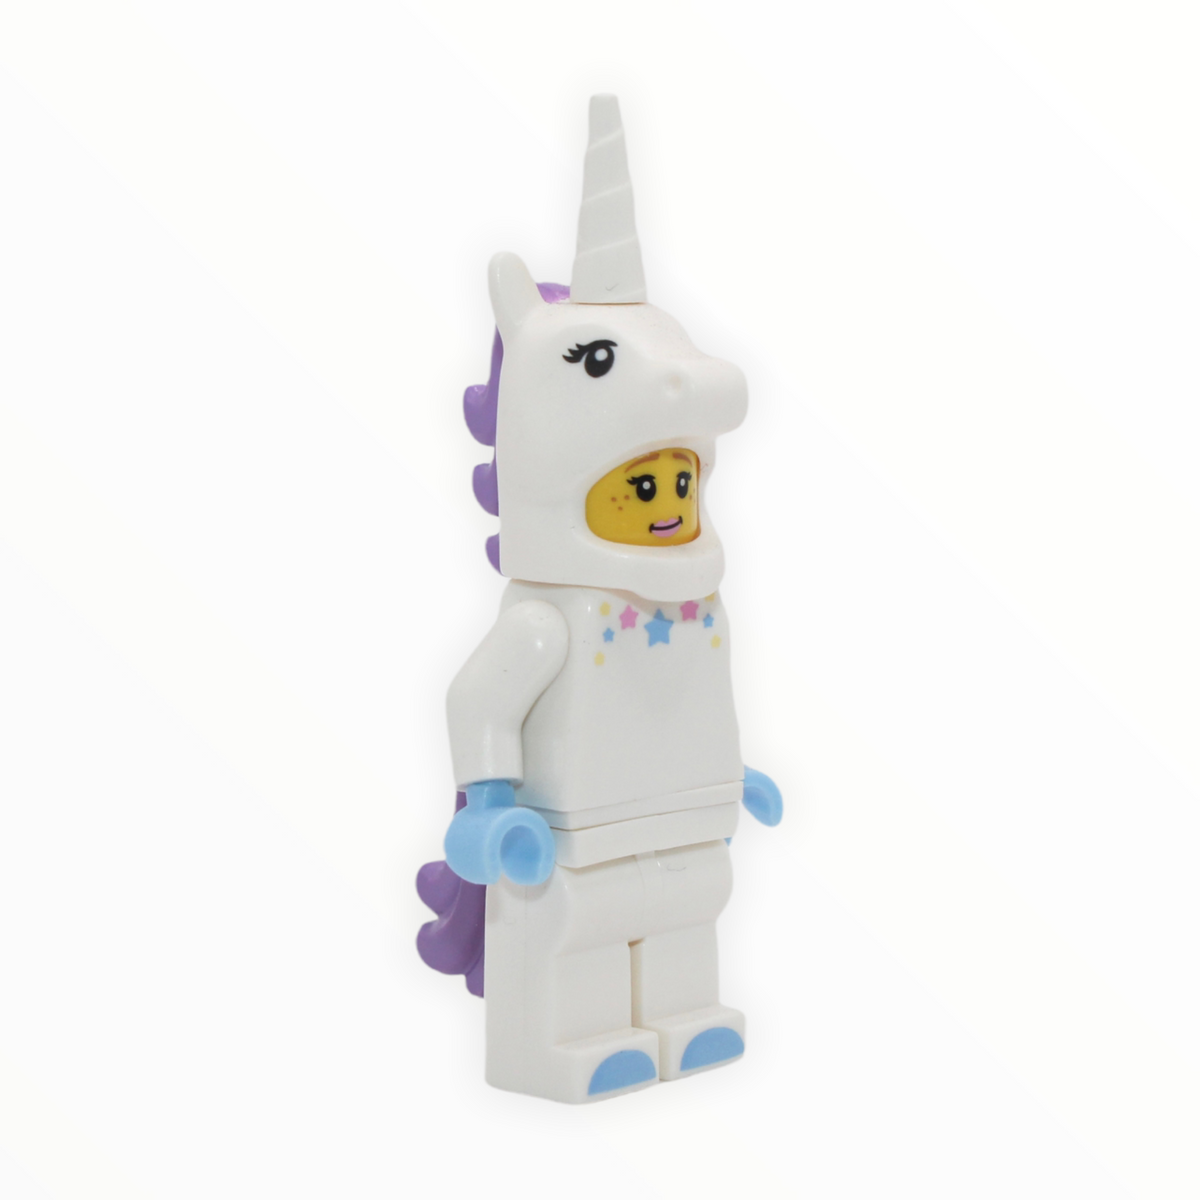 Unicorn Girl, Series 13 (Minifigure Only without Stand and Accessories) :  Minifigure col197